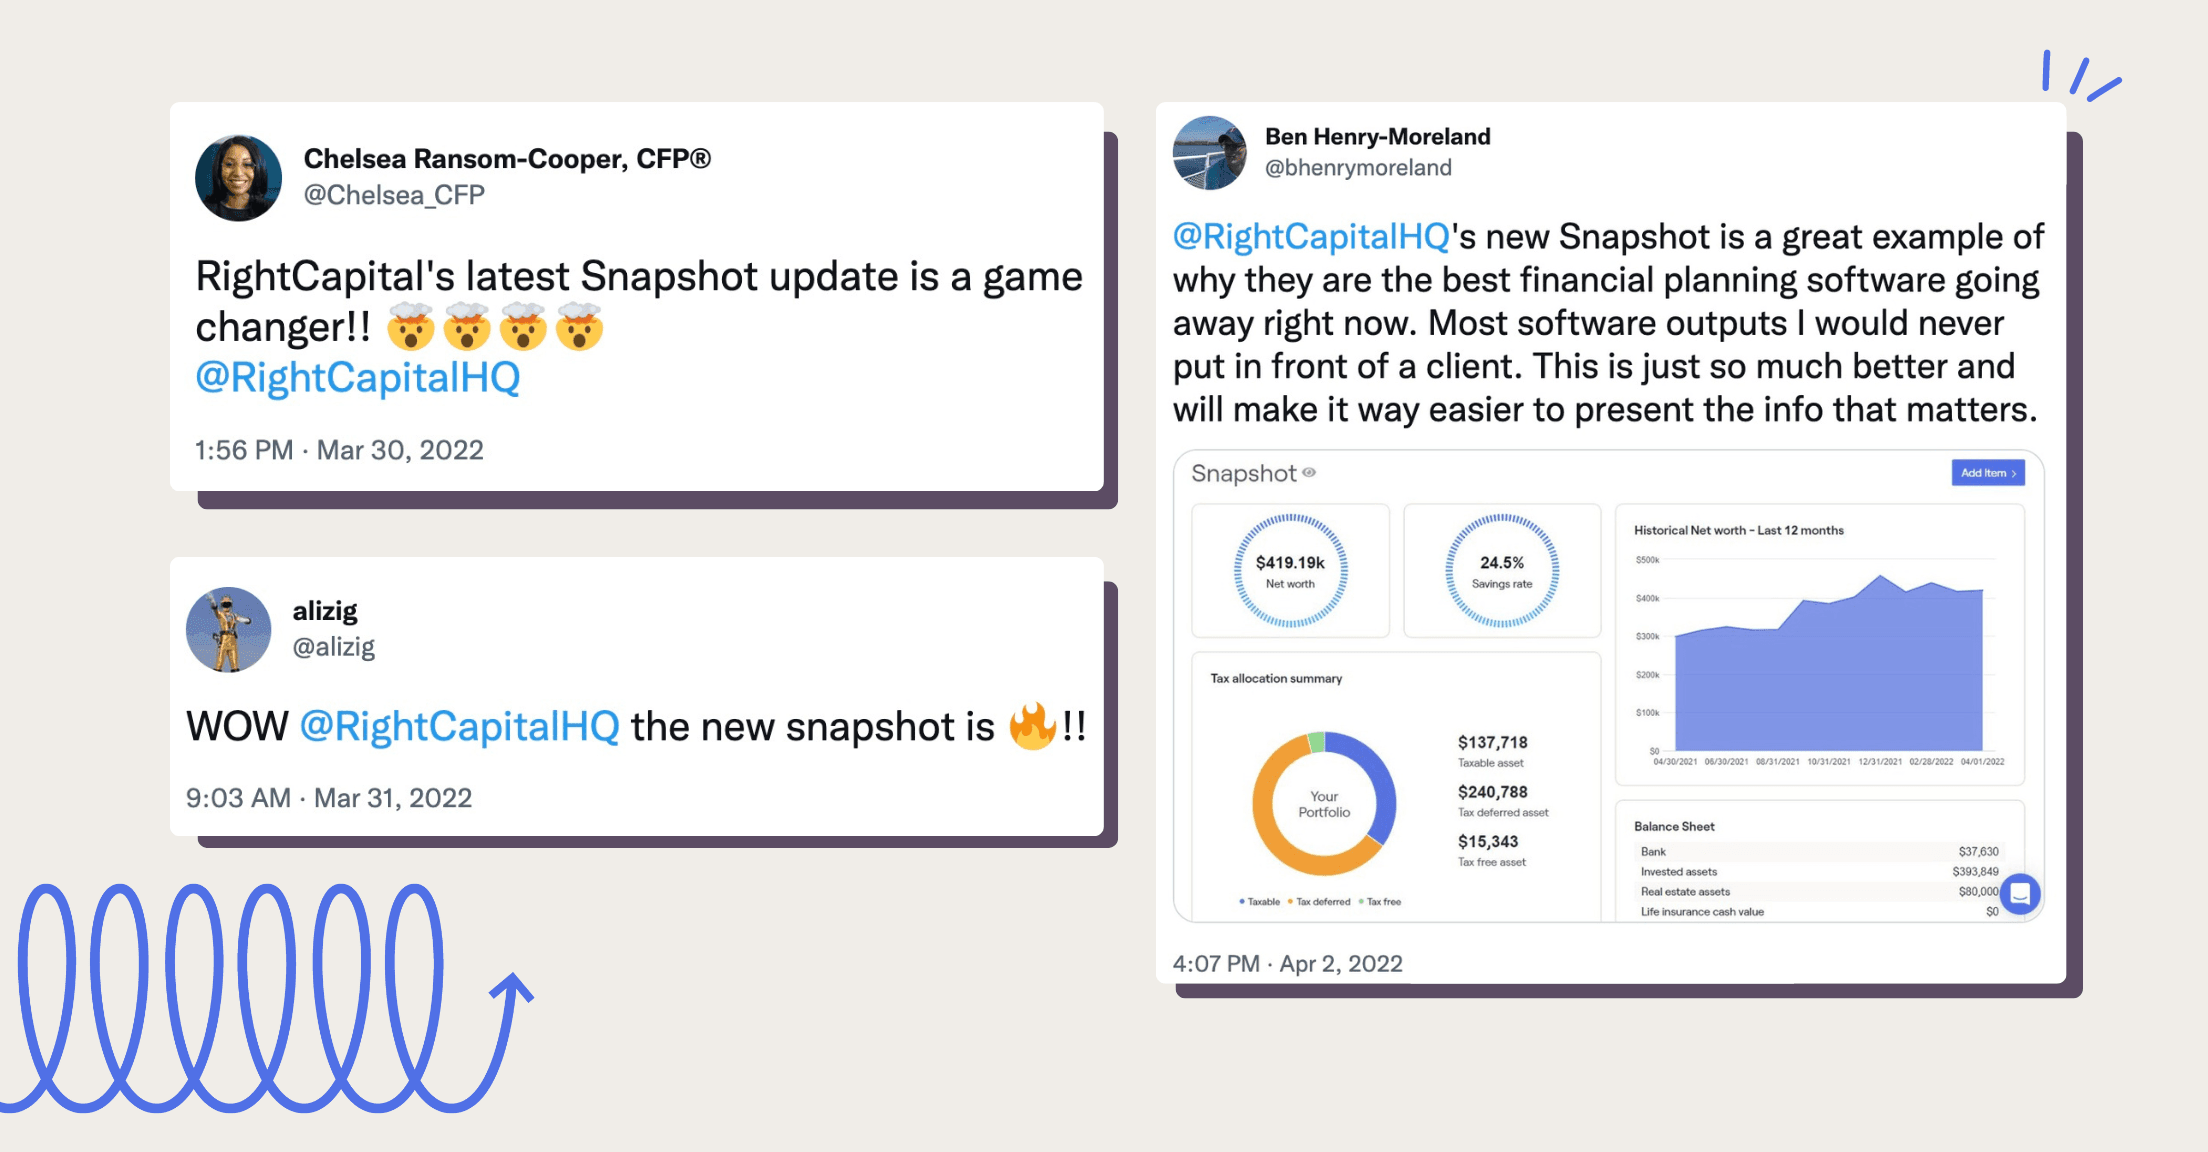 Social media posts about how much financial advisors love the Snapshot feature from RightCapital’s financial planning software